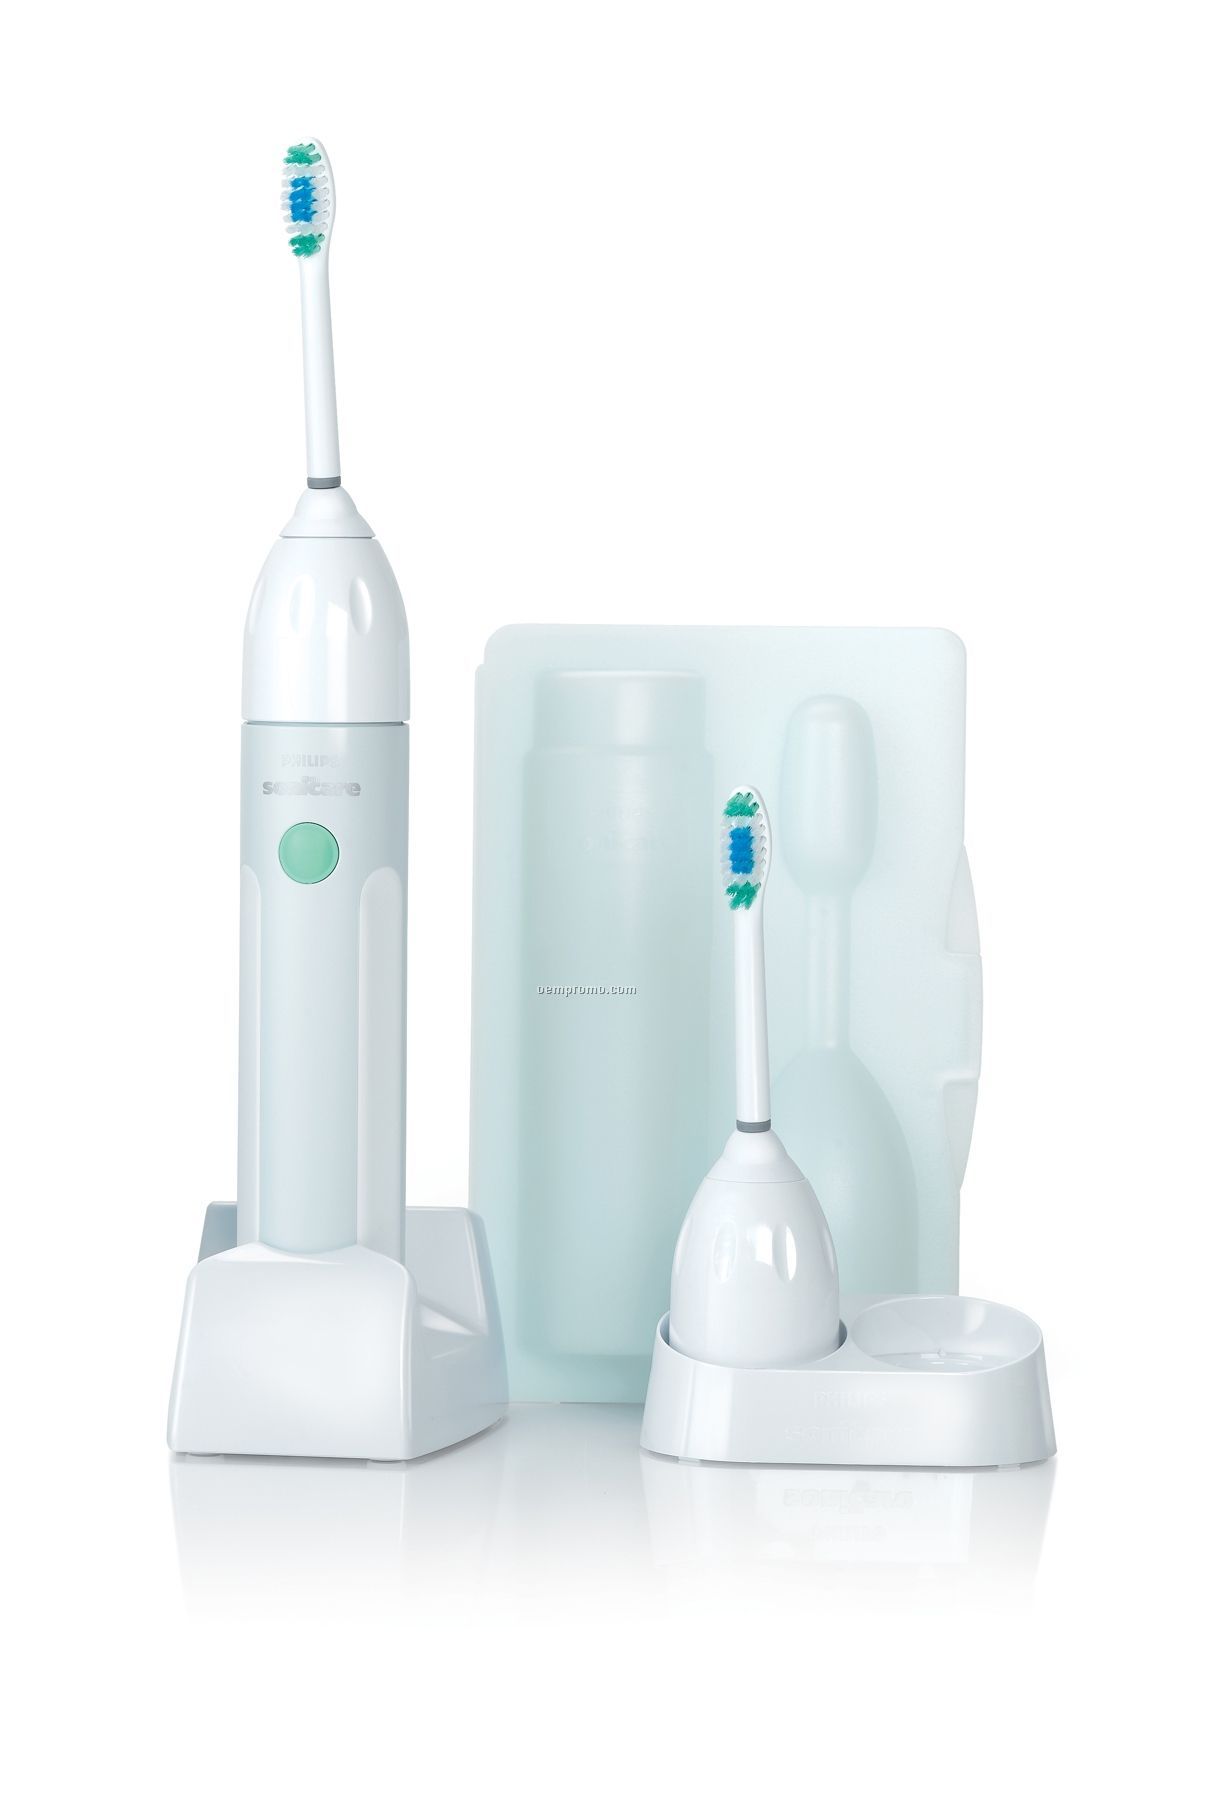 Phillips Sonicare Essence Electric Toothbrush W/ Quadpacer